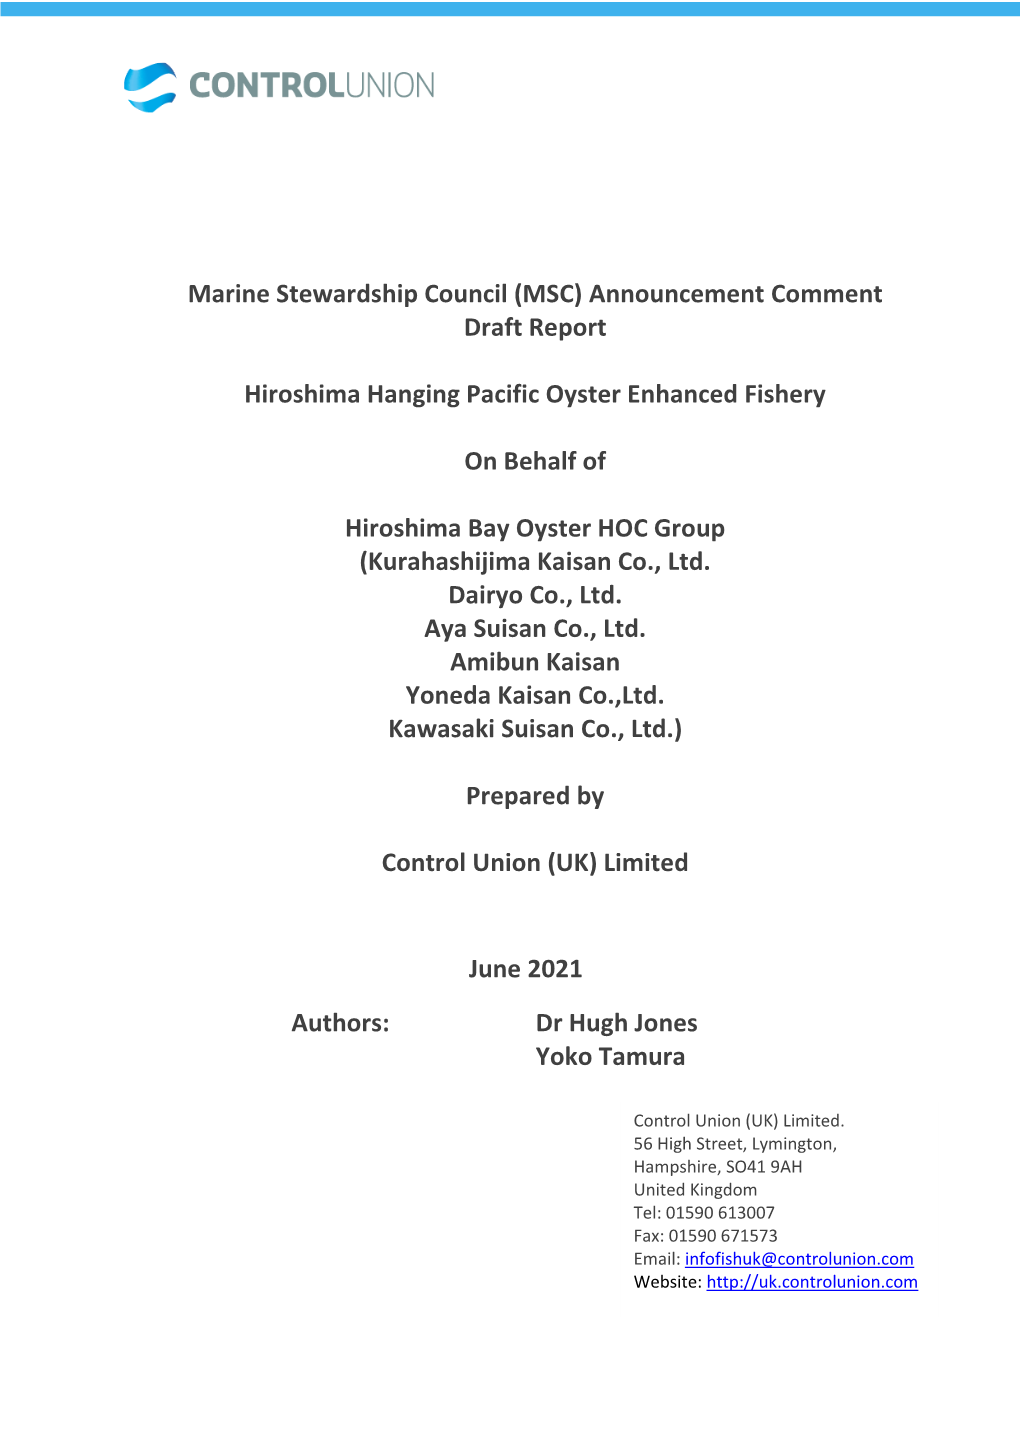 Marine Stewardship Council (MSC) Announcement Comment Draft Report Hiroshima Hanging Pacific Oyster Enhanced Fishery on Behalf O